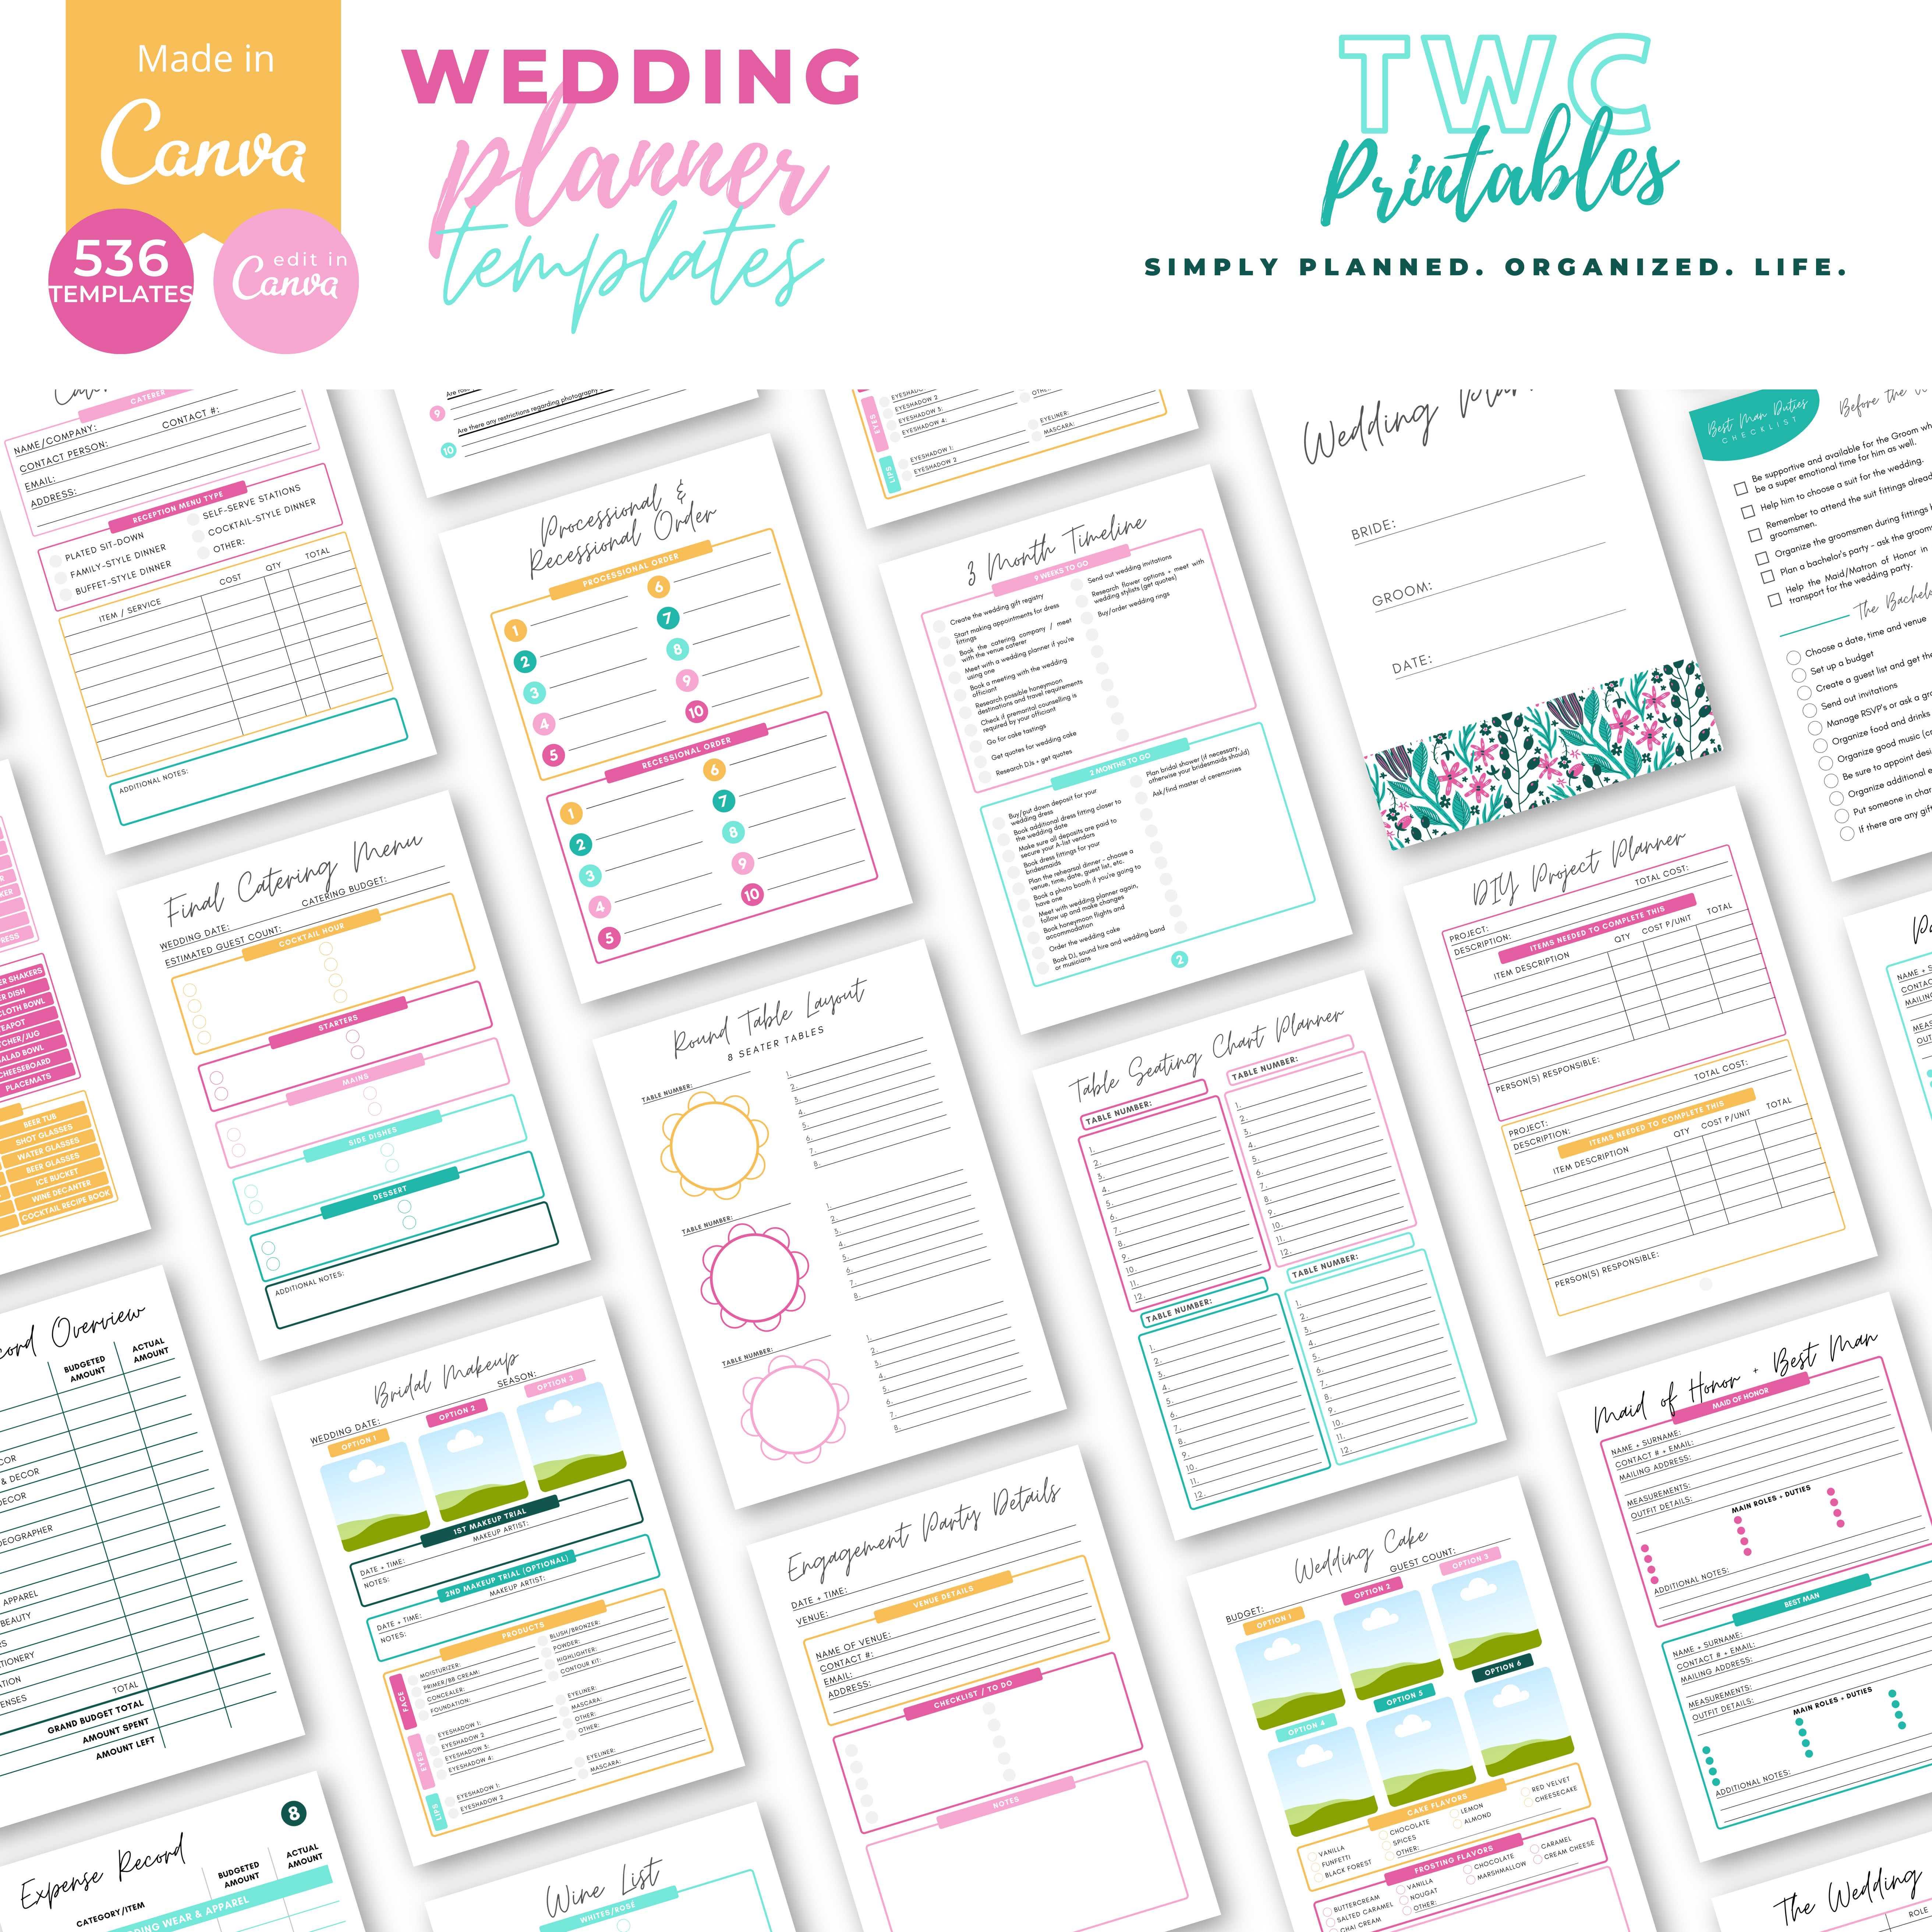 This is it! The editable wedding planner templates for Canva! With over 530 sheets to edit, the wedding binder template for Canva contains everything you need to plan your dream wedding. Use these templates to create your own wedding planner binder, or edit and print everything out to create a complete wedding binder! Simply edit this template with Canva! It comes in bright colors, but you can change everything in these templates from fonts, colors, elements, shapes, layouts, and more! All you need is a free Canva account! A free Canva guide for beginners is included in your purchase of this listing.